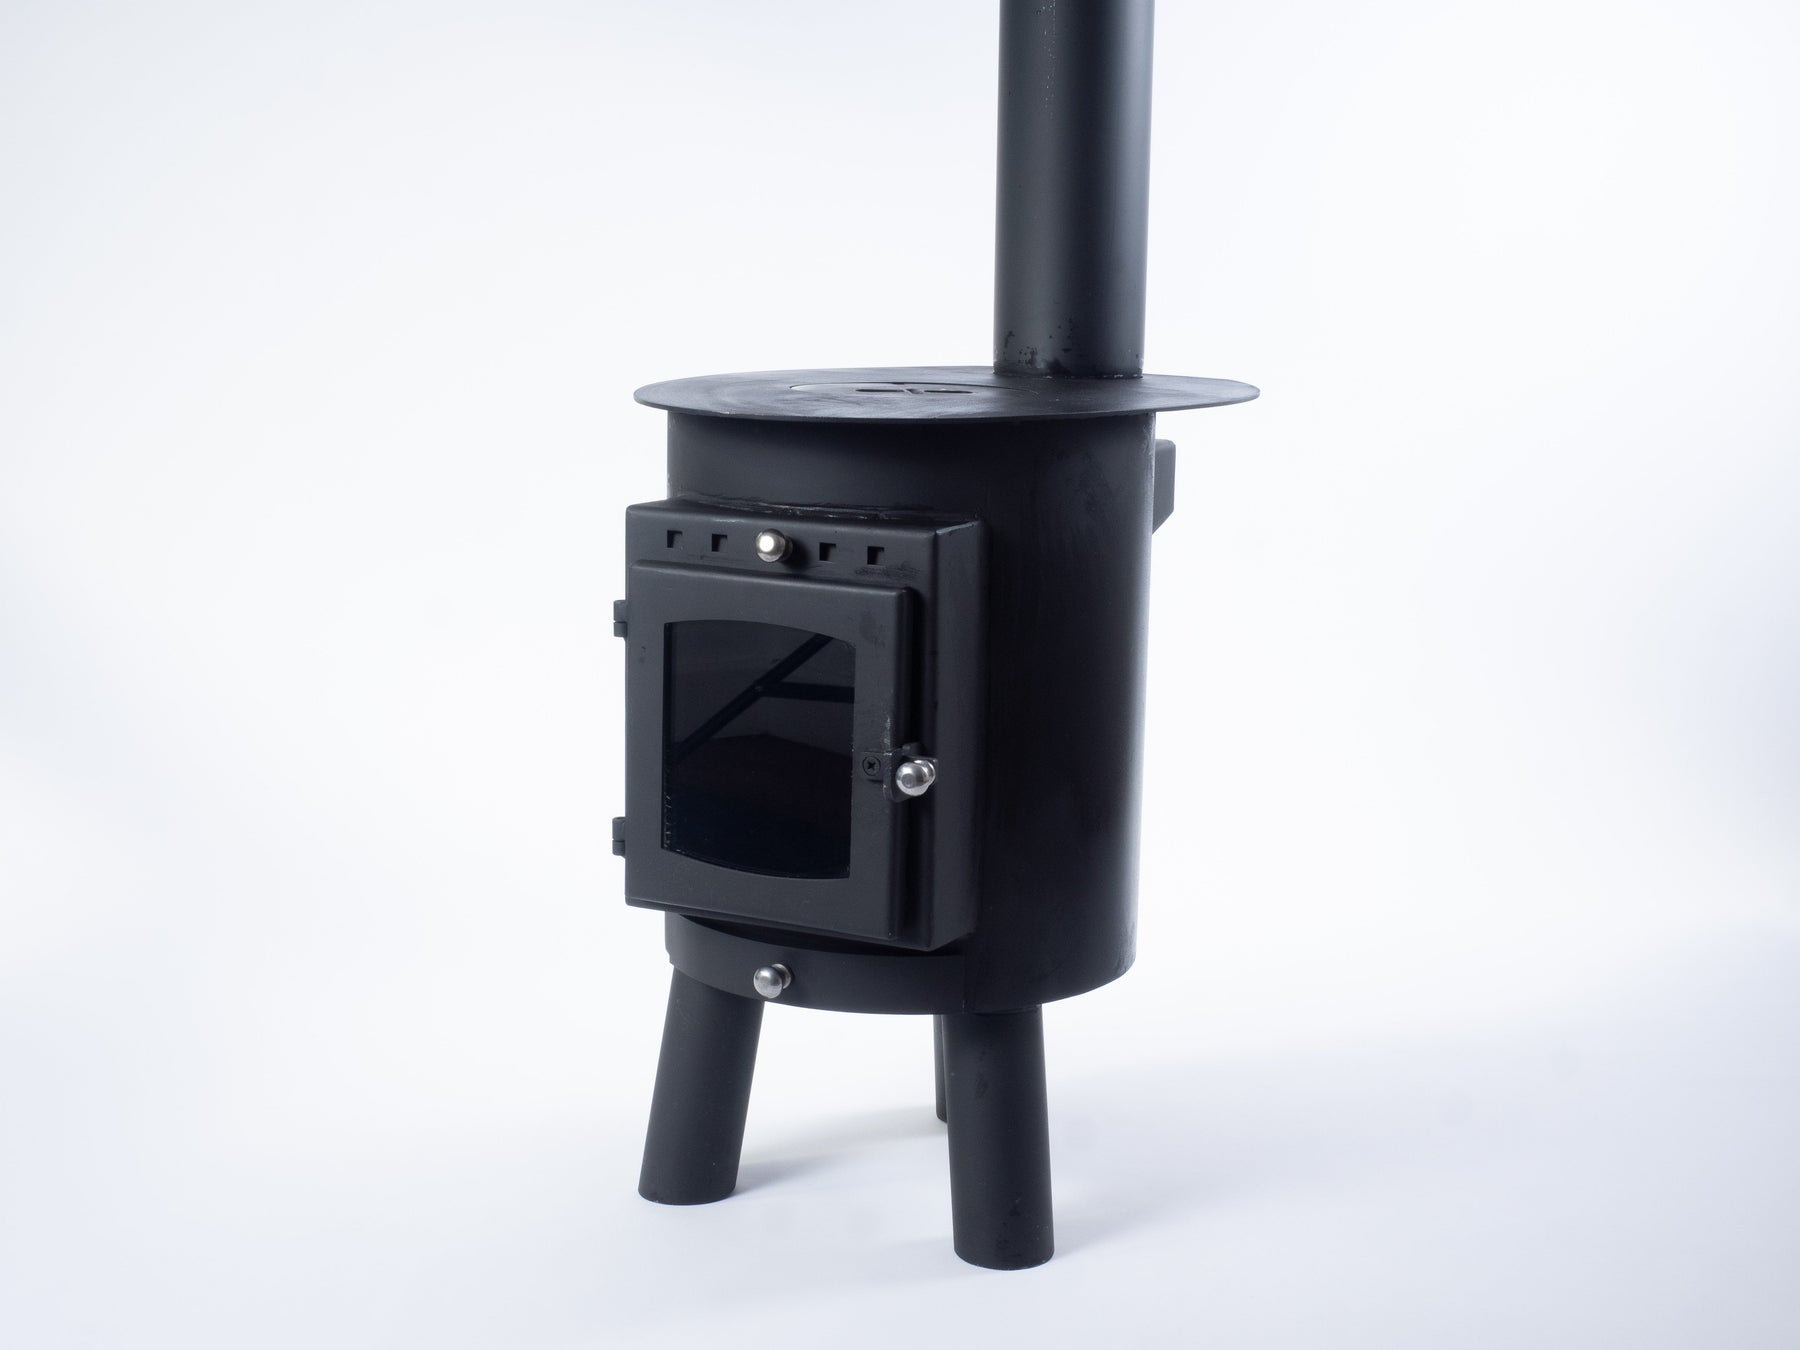 Outbacker® Hygge Shed Stove